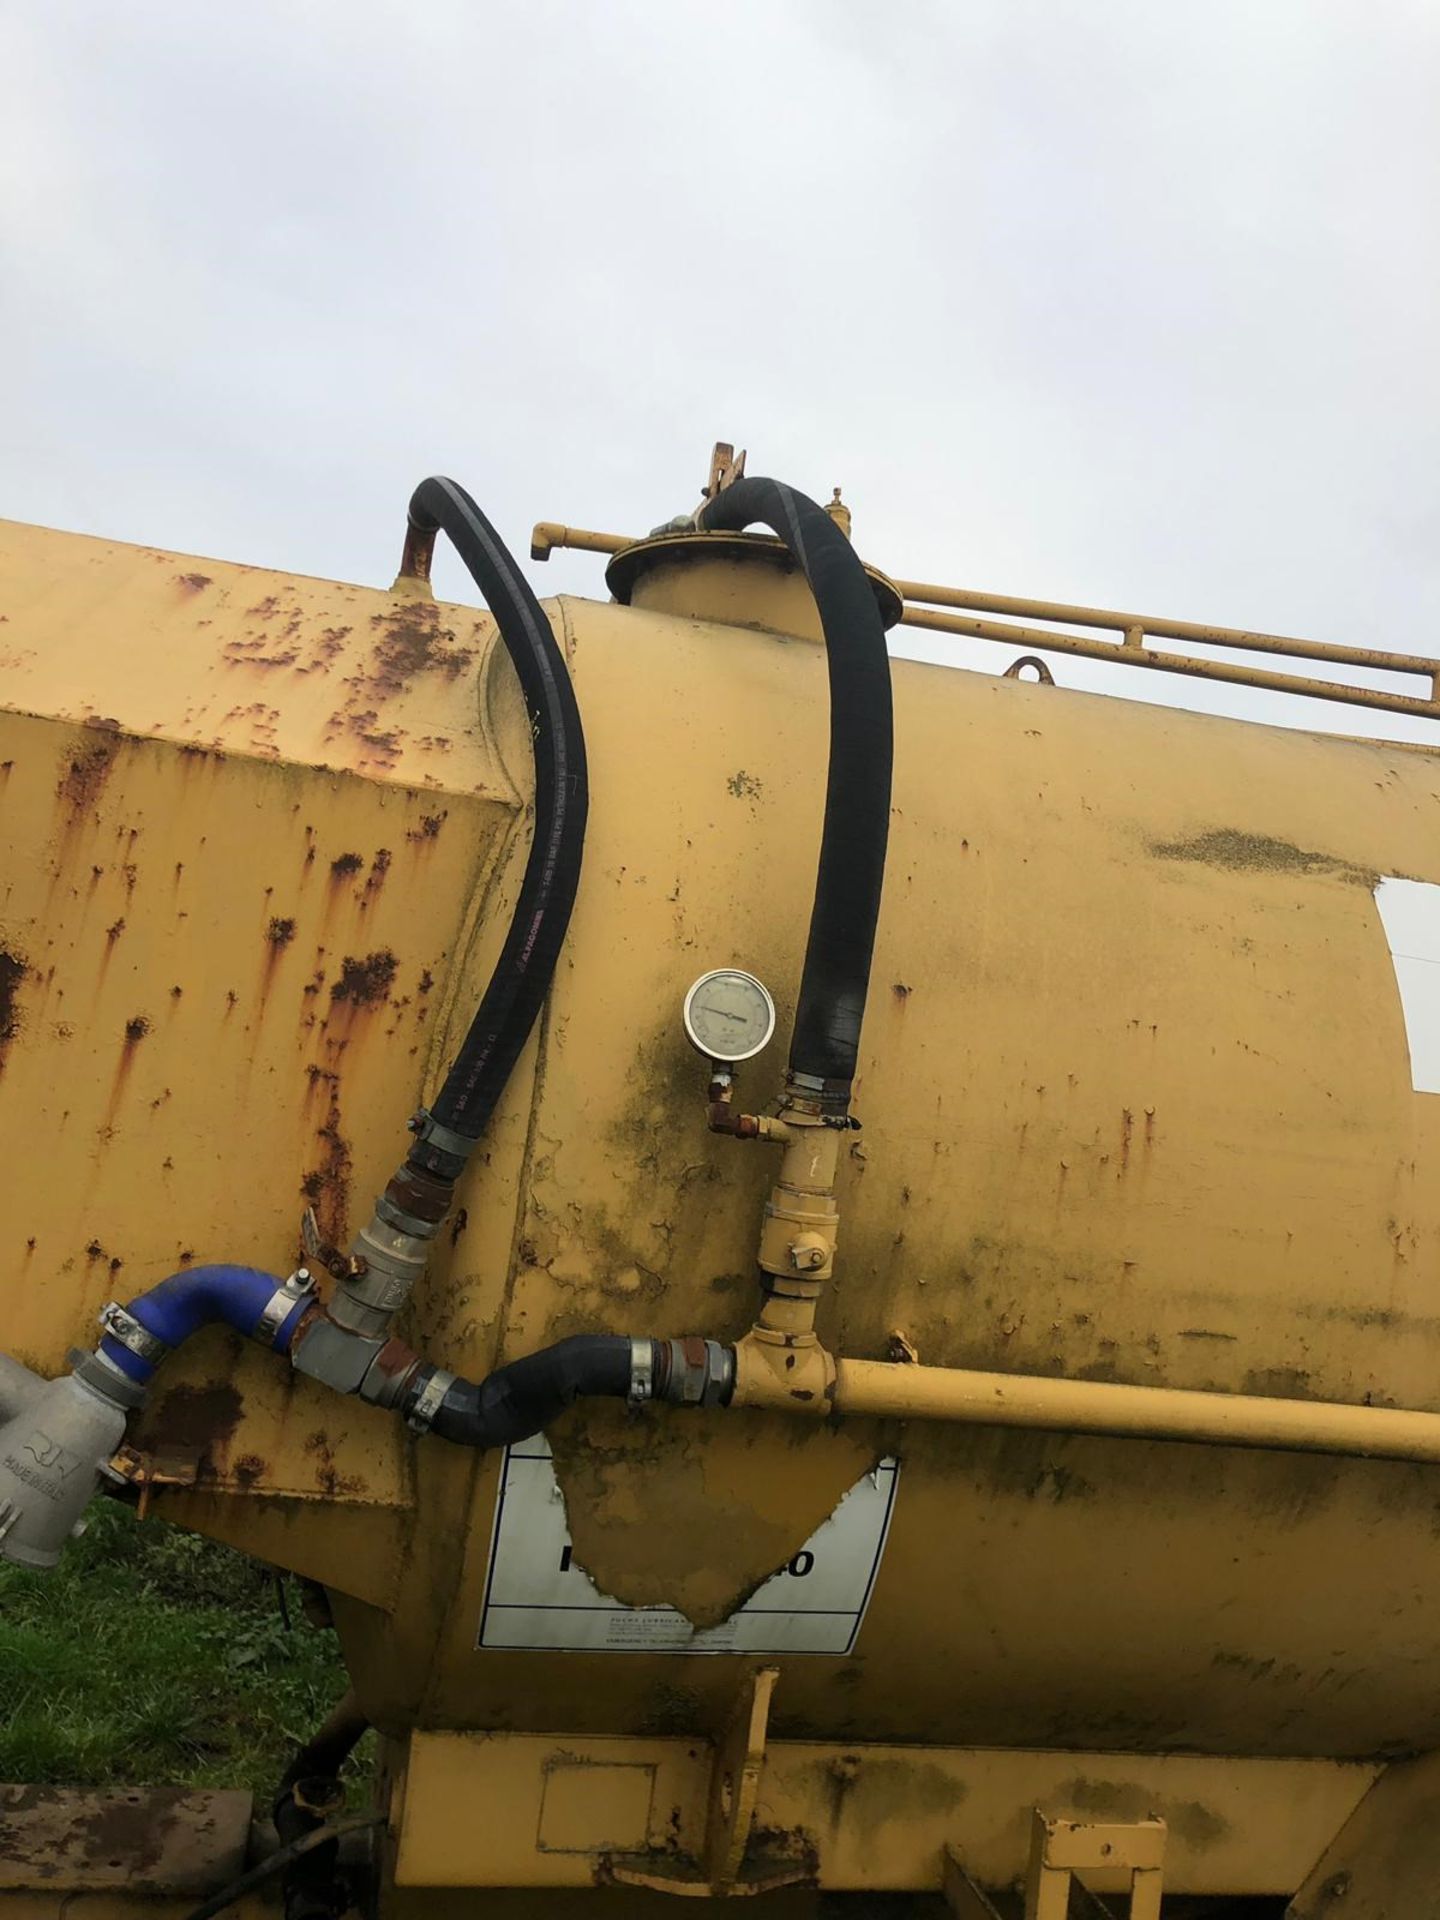 1989 TWIN AXLE TOW ABLE YELLOW OIL TANK, SERIAL NUMBER: VE 355 *PLUS VAT* - Image 2 of 10